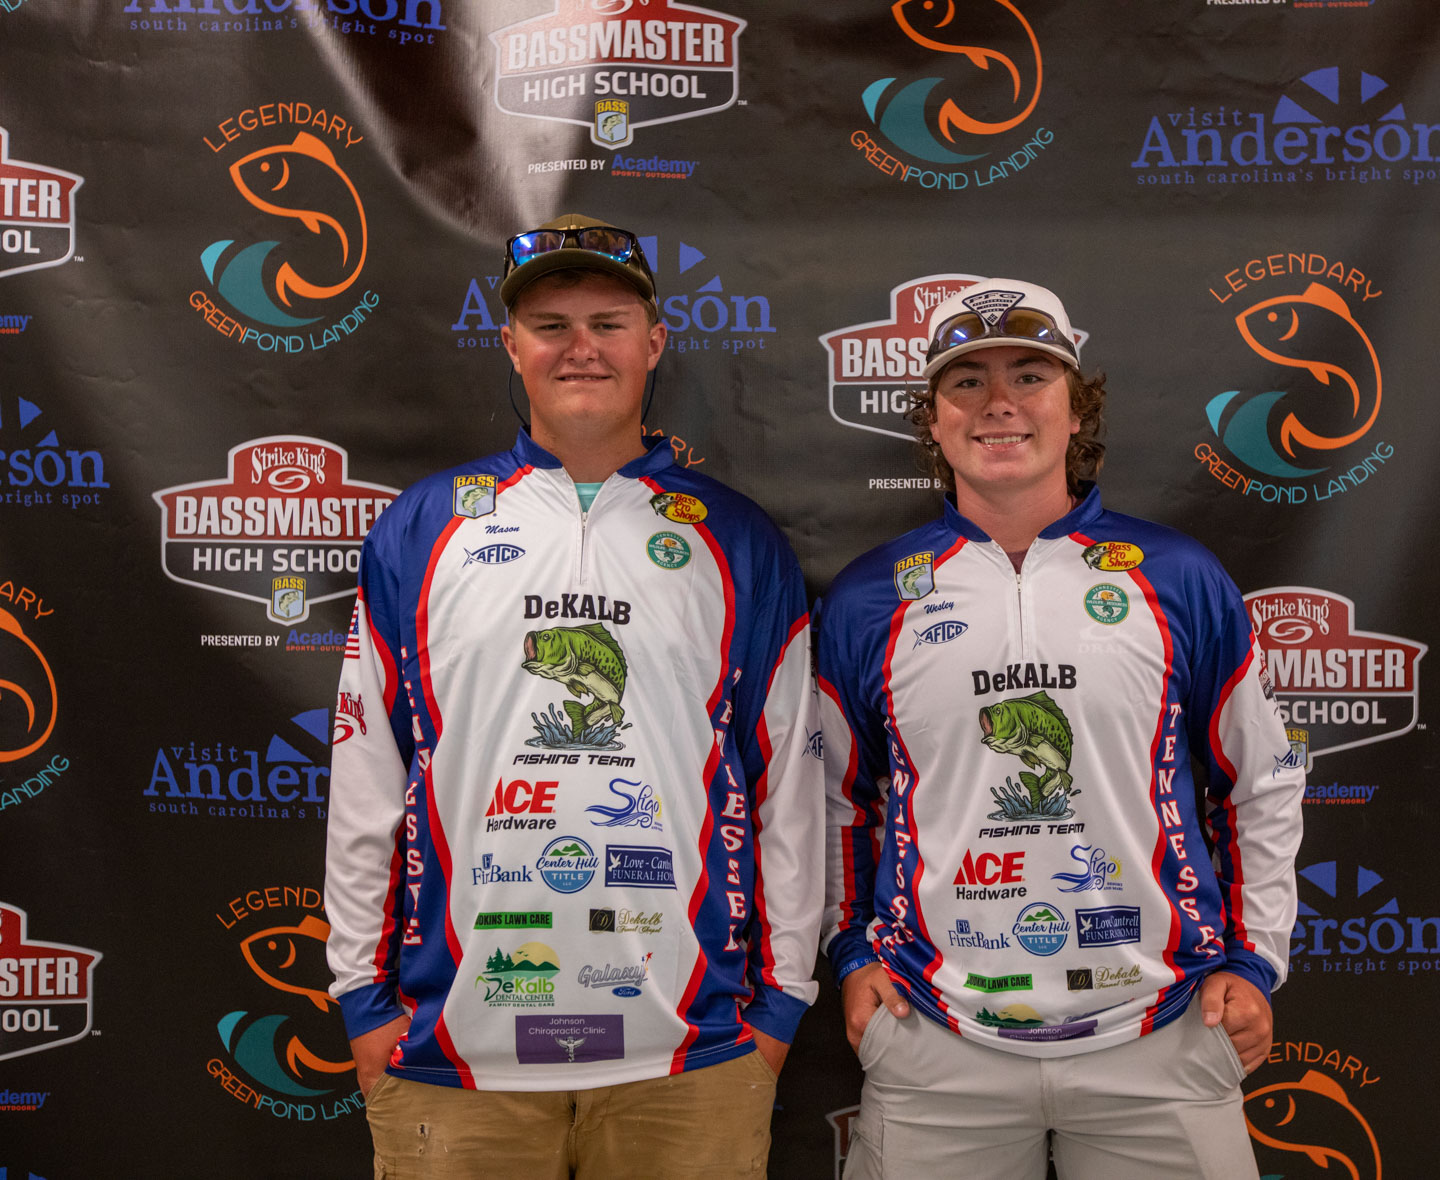 Very cool Greenbrier High School competitive fishing team jerseys